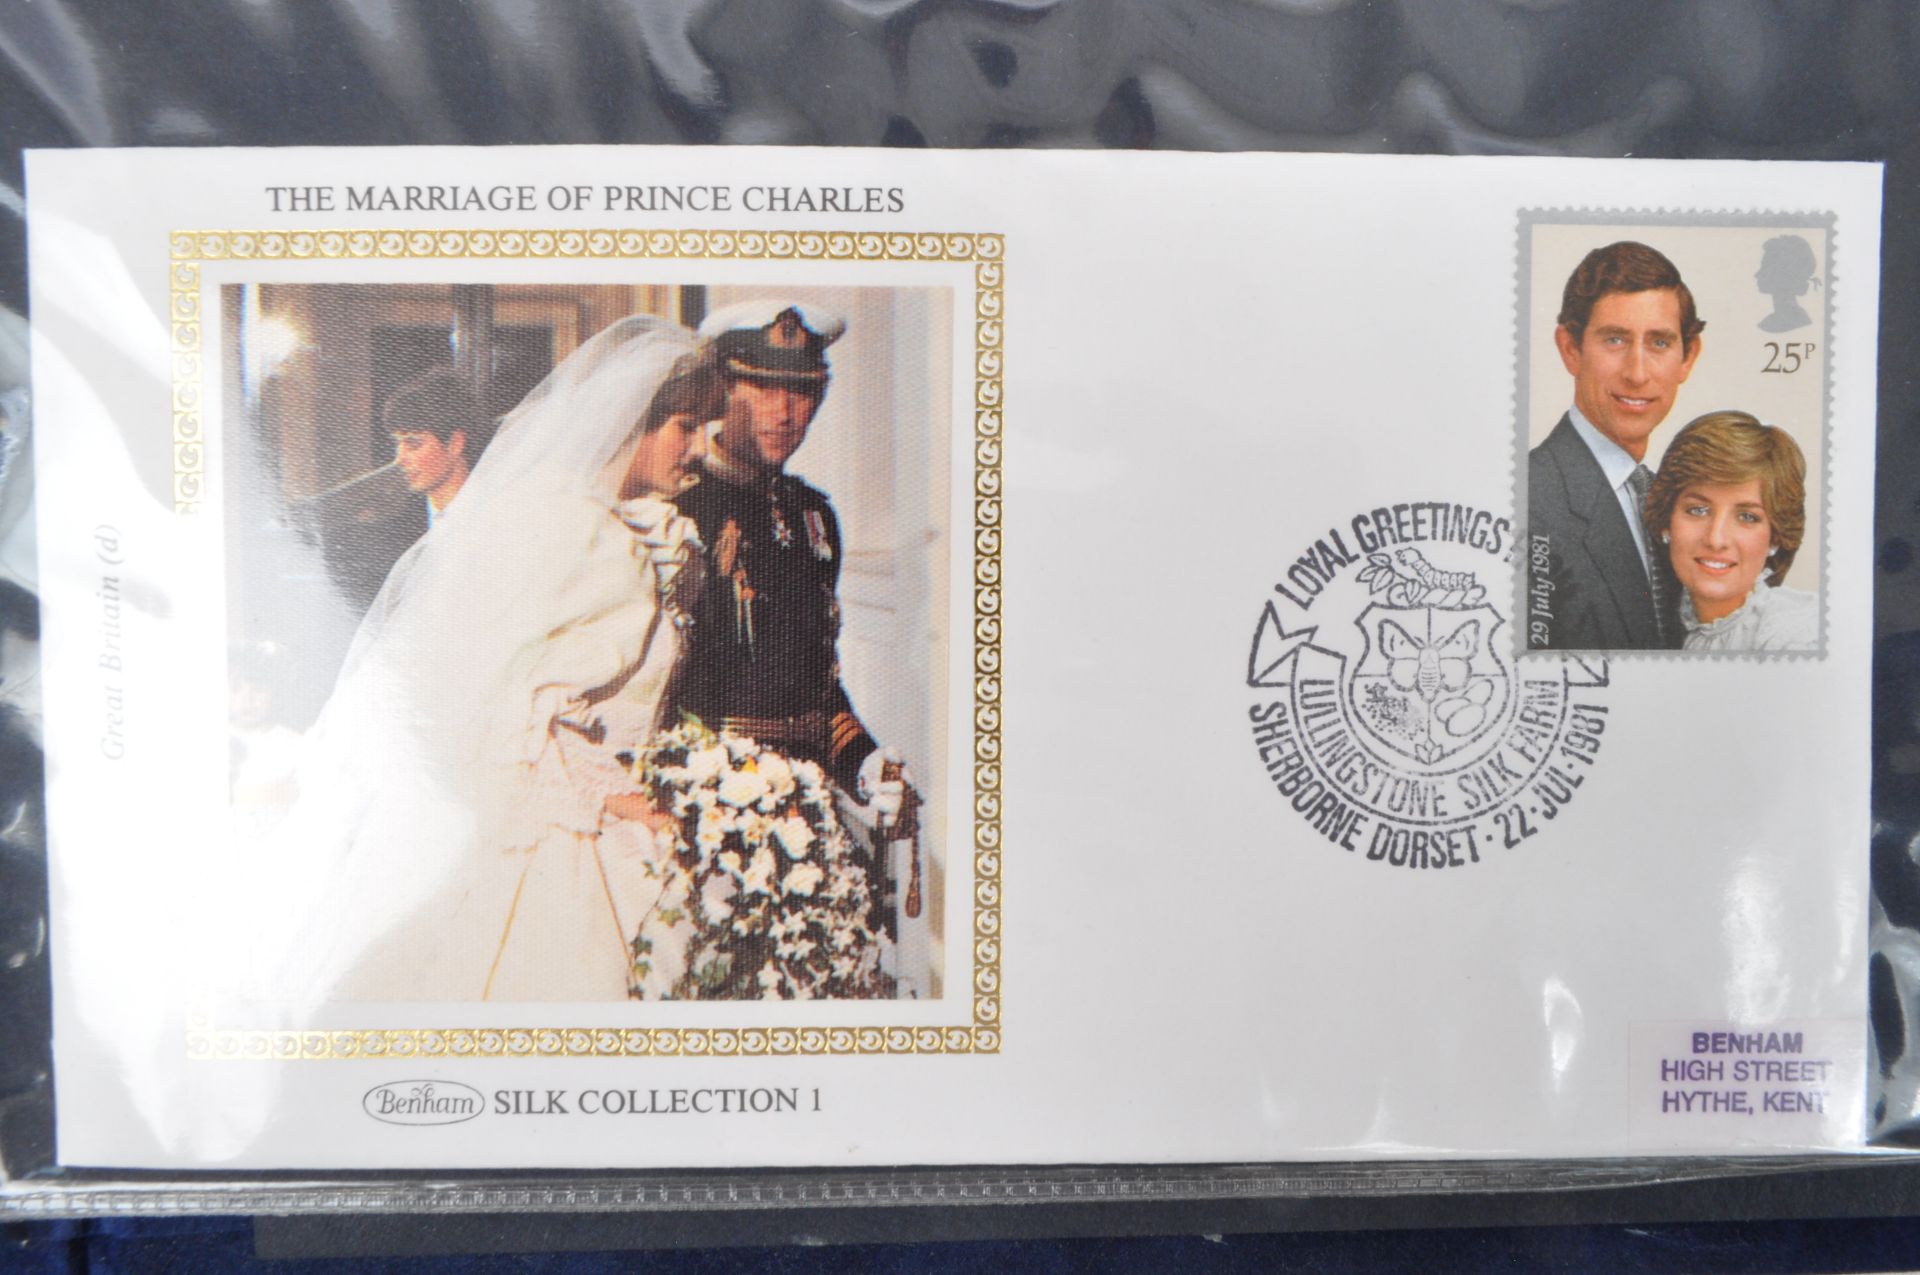 COLLECTION OF UK STAMPS - PRESENTATION PACKS & FIRST DAY COVERS - Image 7 of 7